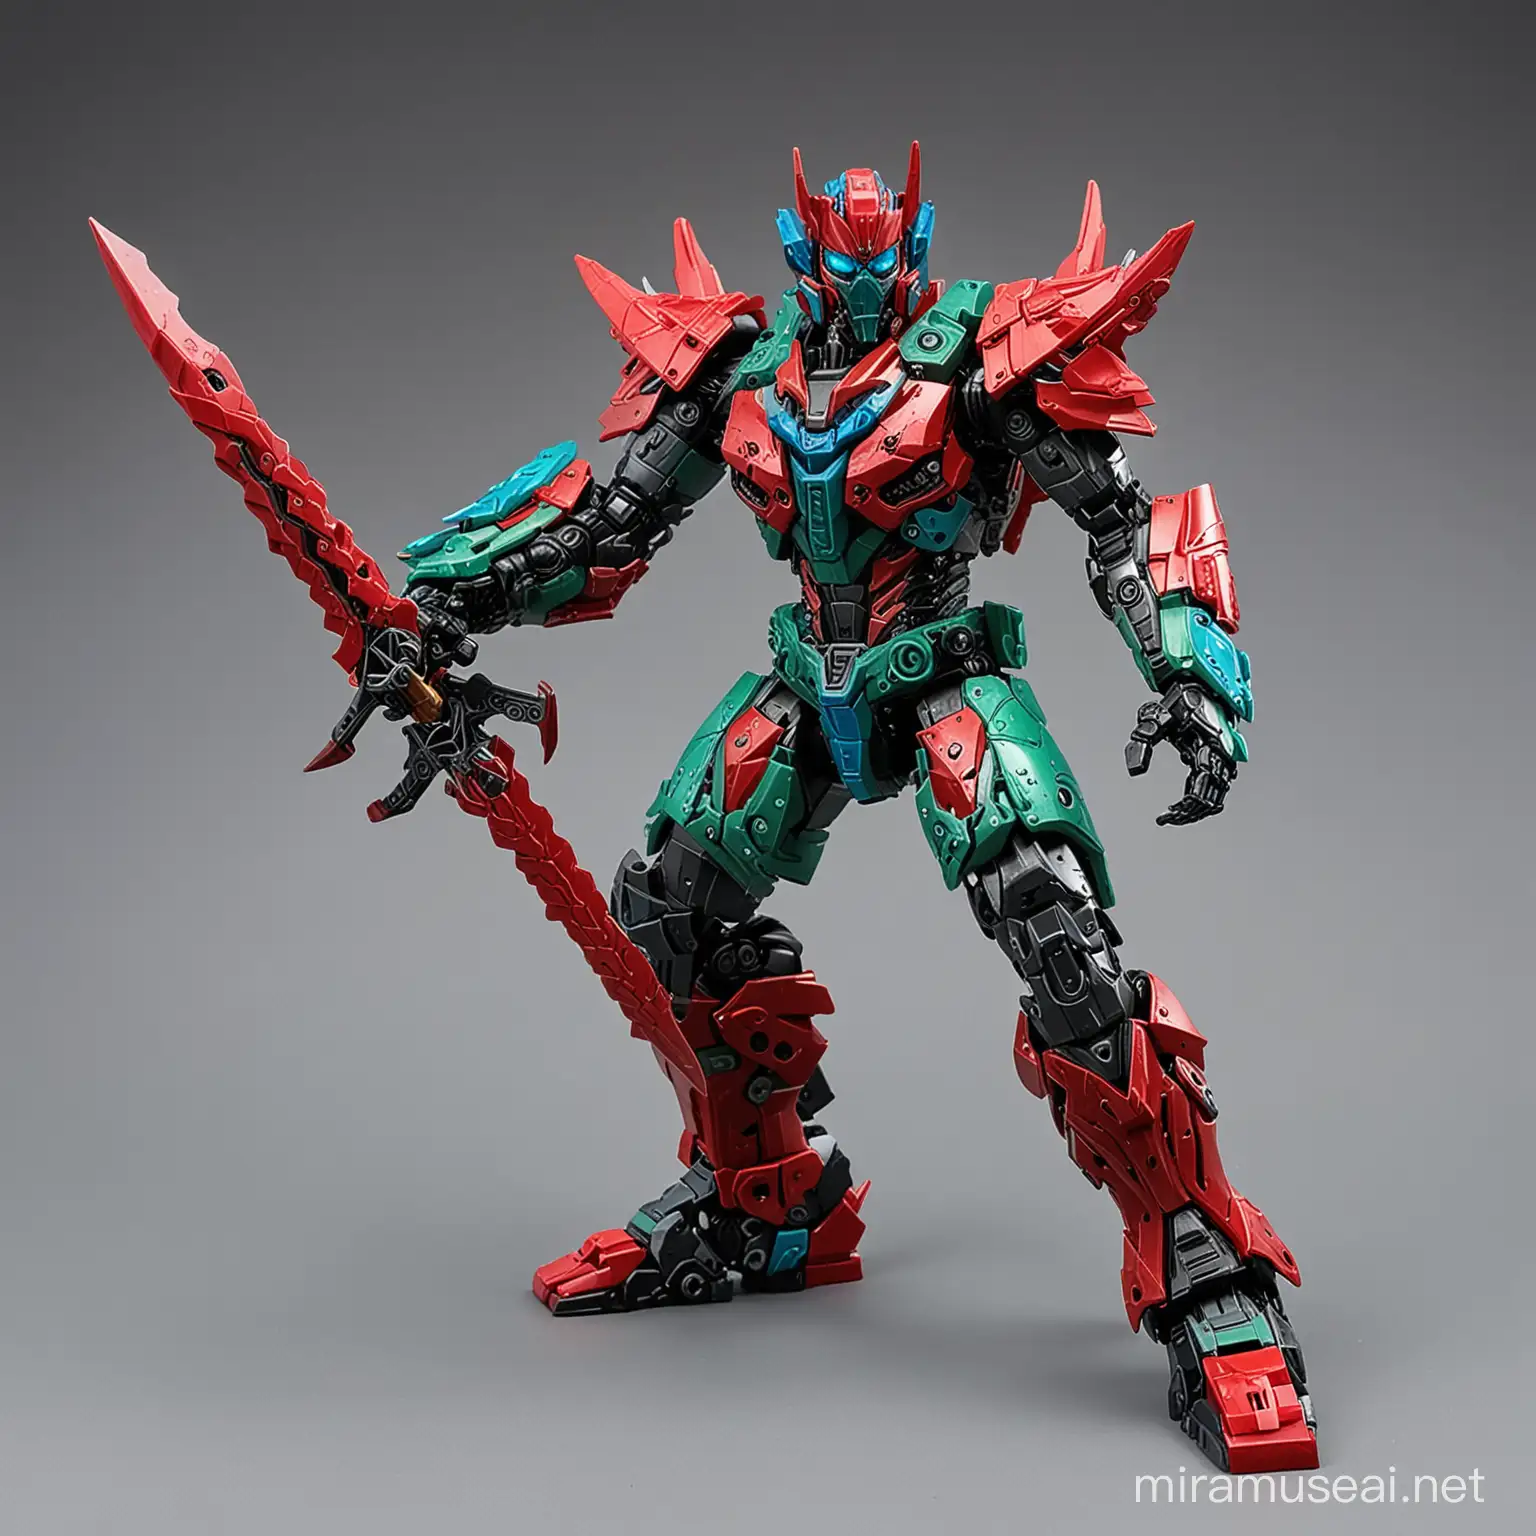 Create a fish man transformer in red blue green black colour battle mode with nebula sword